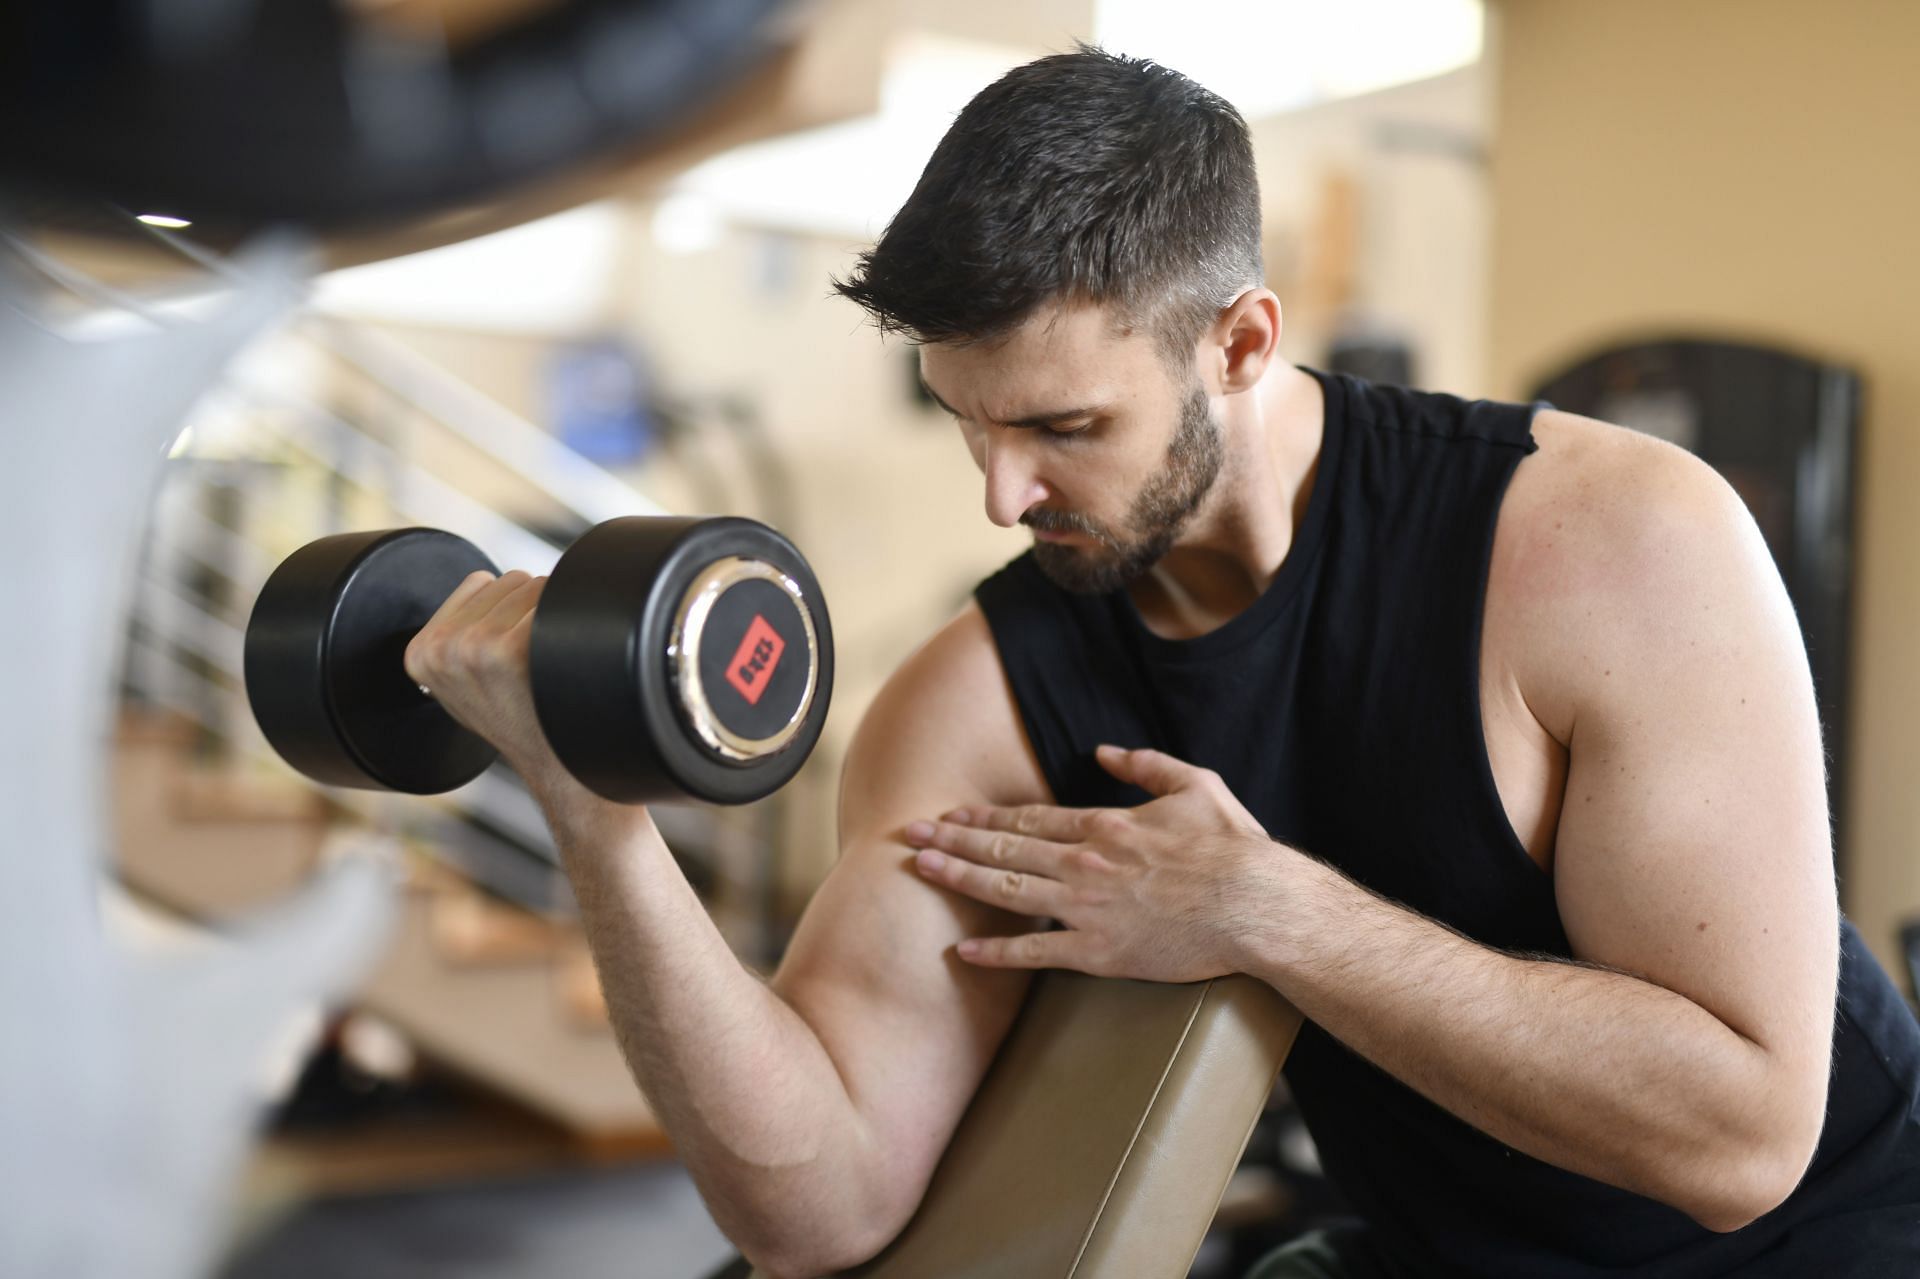 Chest exercises will help you to build a stronger and muscular physique. (Image via Pexels/Andrea Piacquadio)